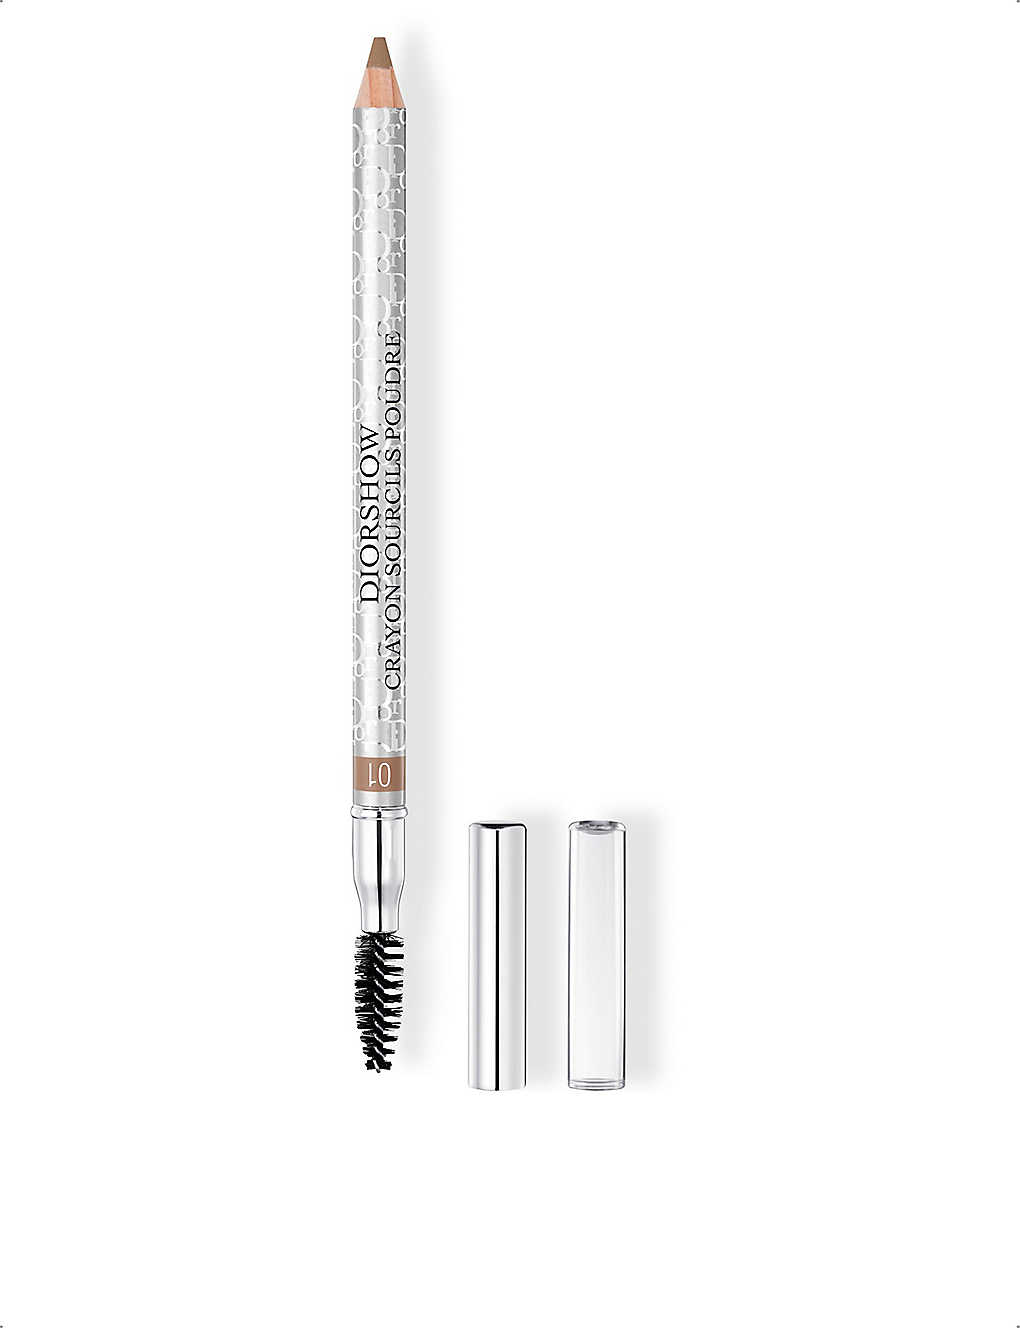 Dior Show Crayon Sourcils Poudre Eyebrow Pencil 0.2g In 01 - Blond